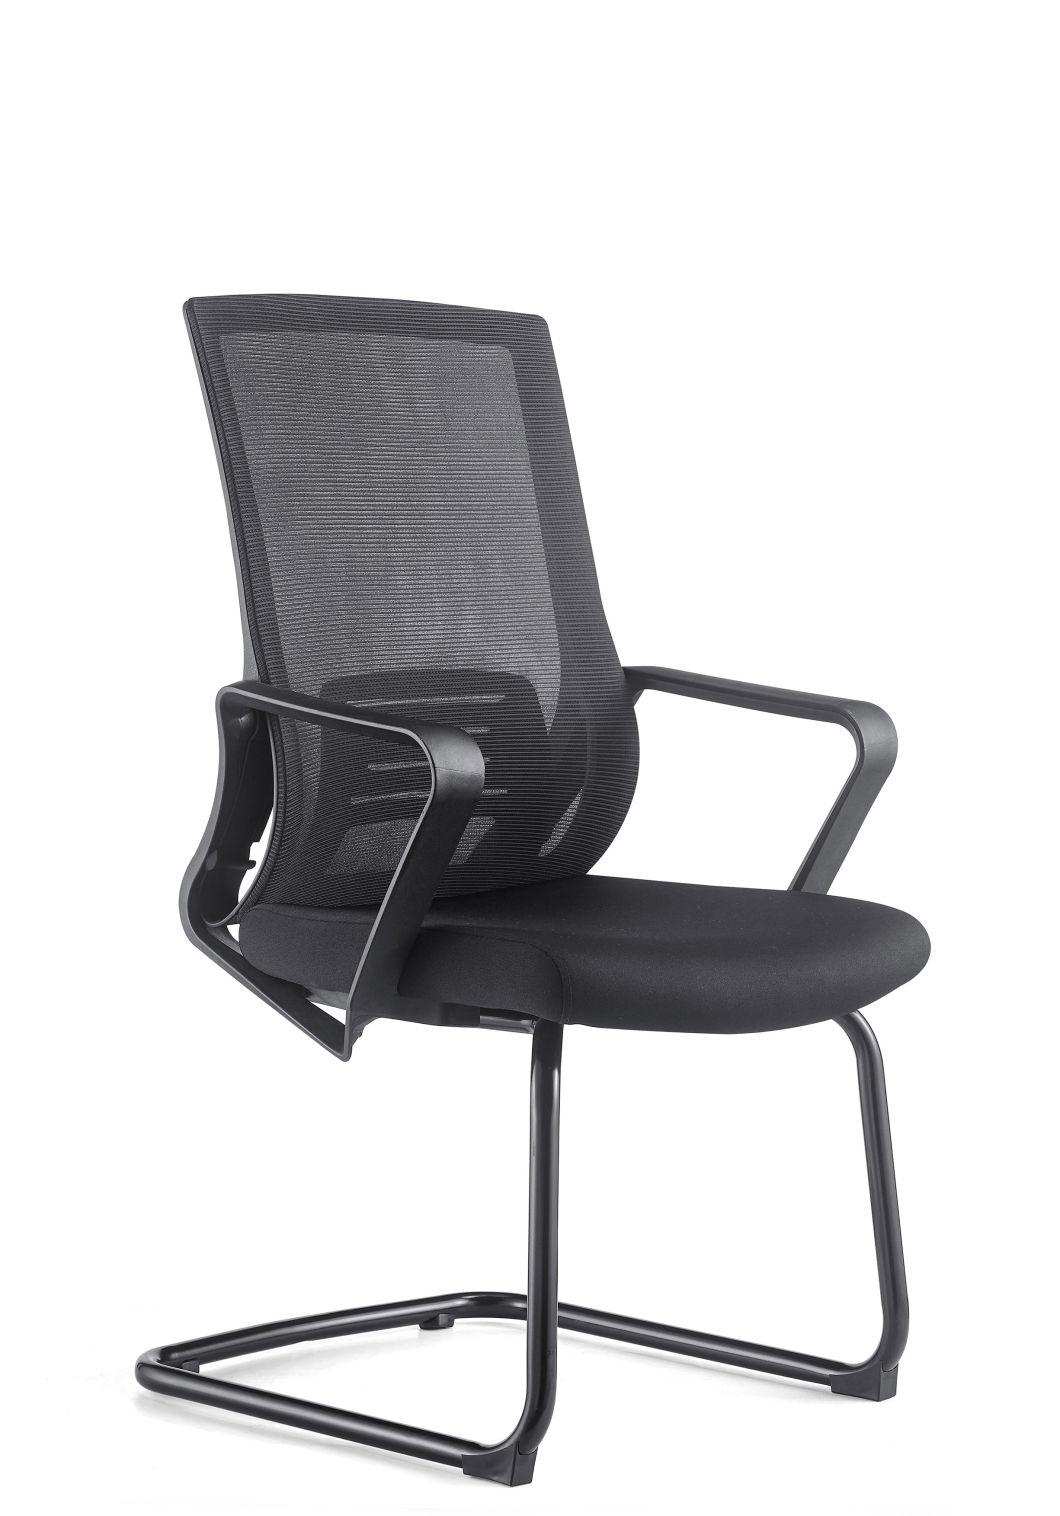 Anti-Sound Wheels Armrest and Backrest Office Mesh Chairs